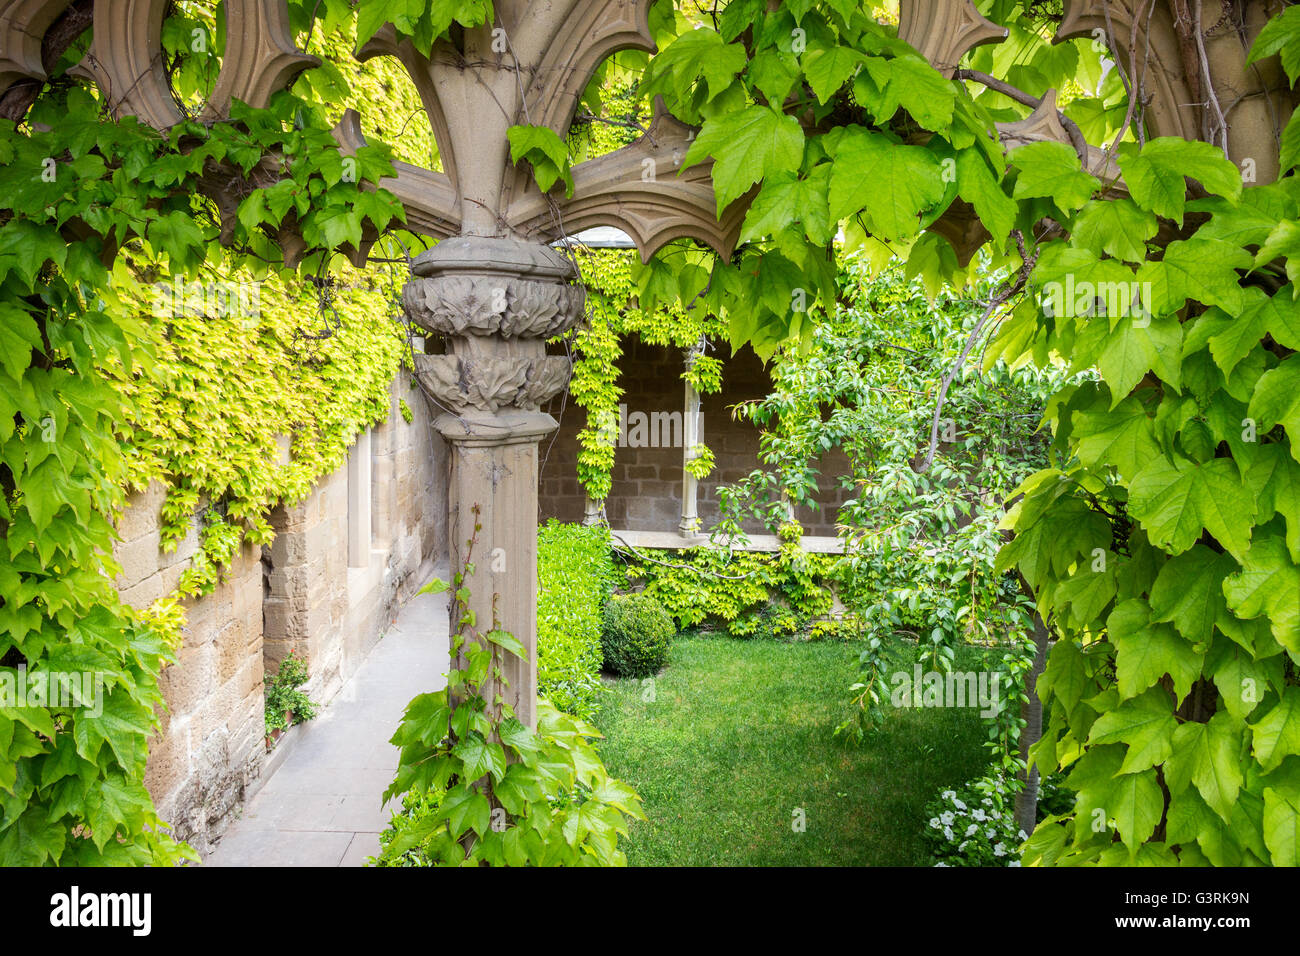 Grape leaves covering an inner court of a medieval castle Stock Photo